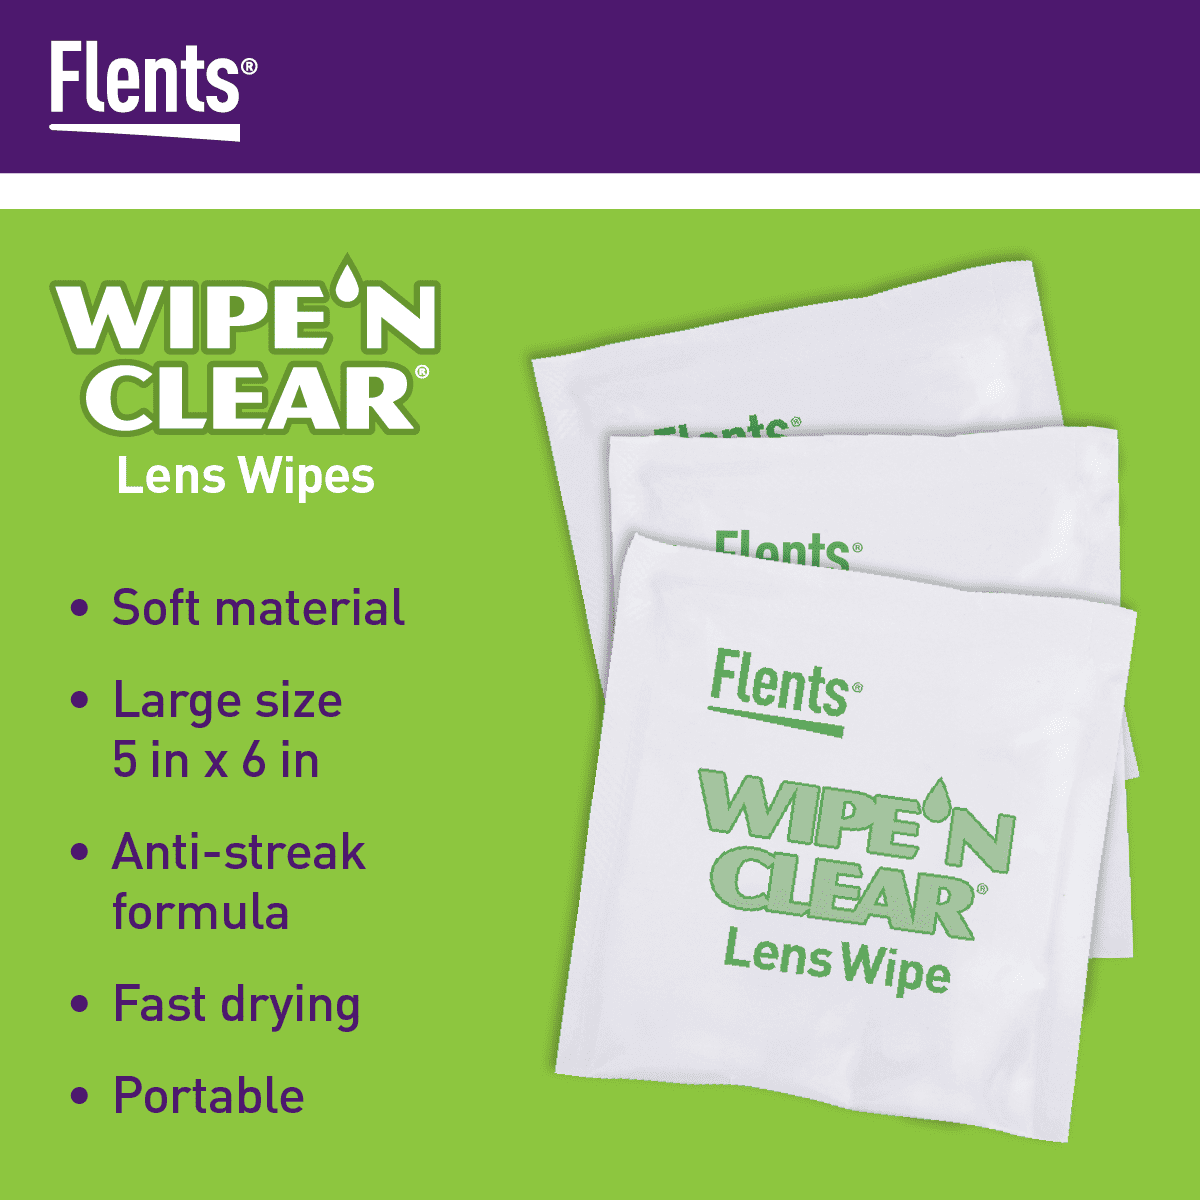 RTS Biodegradable All-Purpose Cleaning Wipes - The Hardware Connection